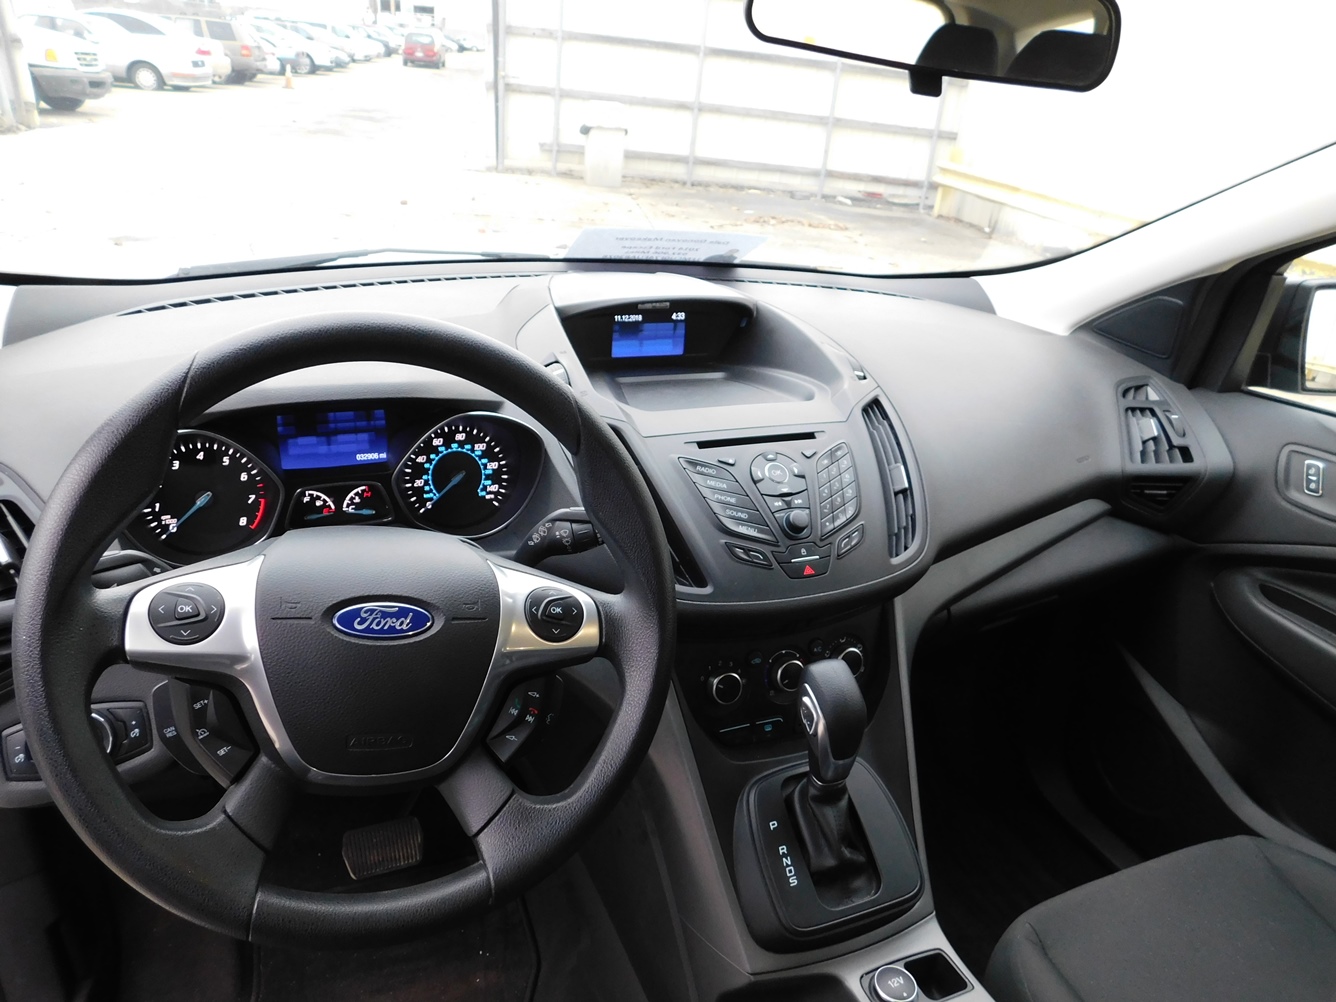 Interior of 2014 Ford Escape SUV featured at Goodwill Auto Auction